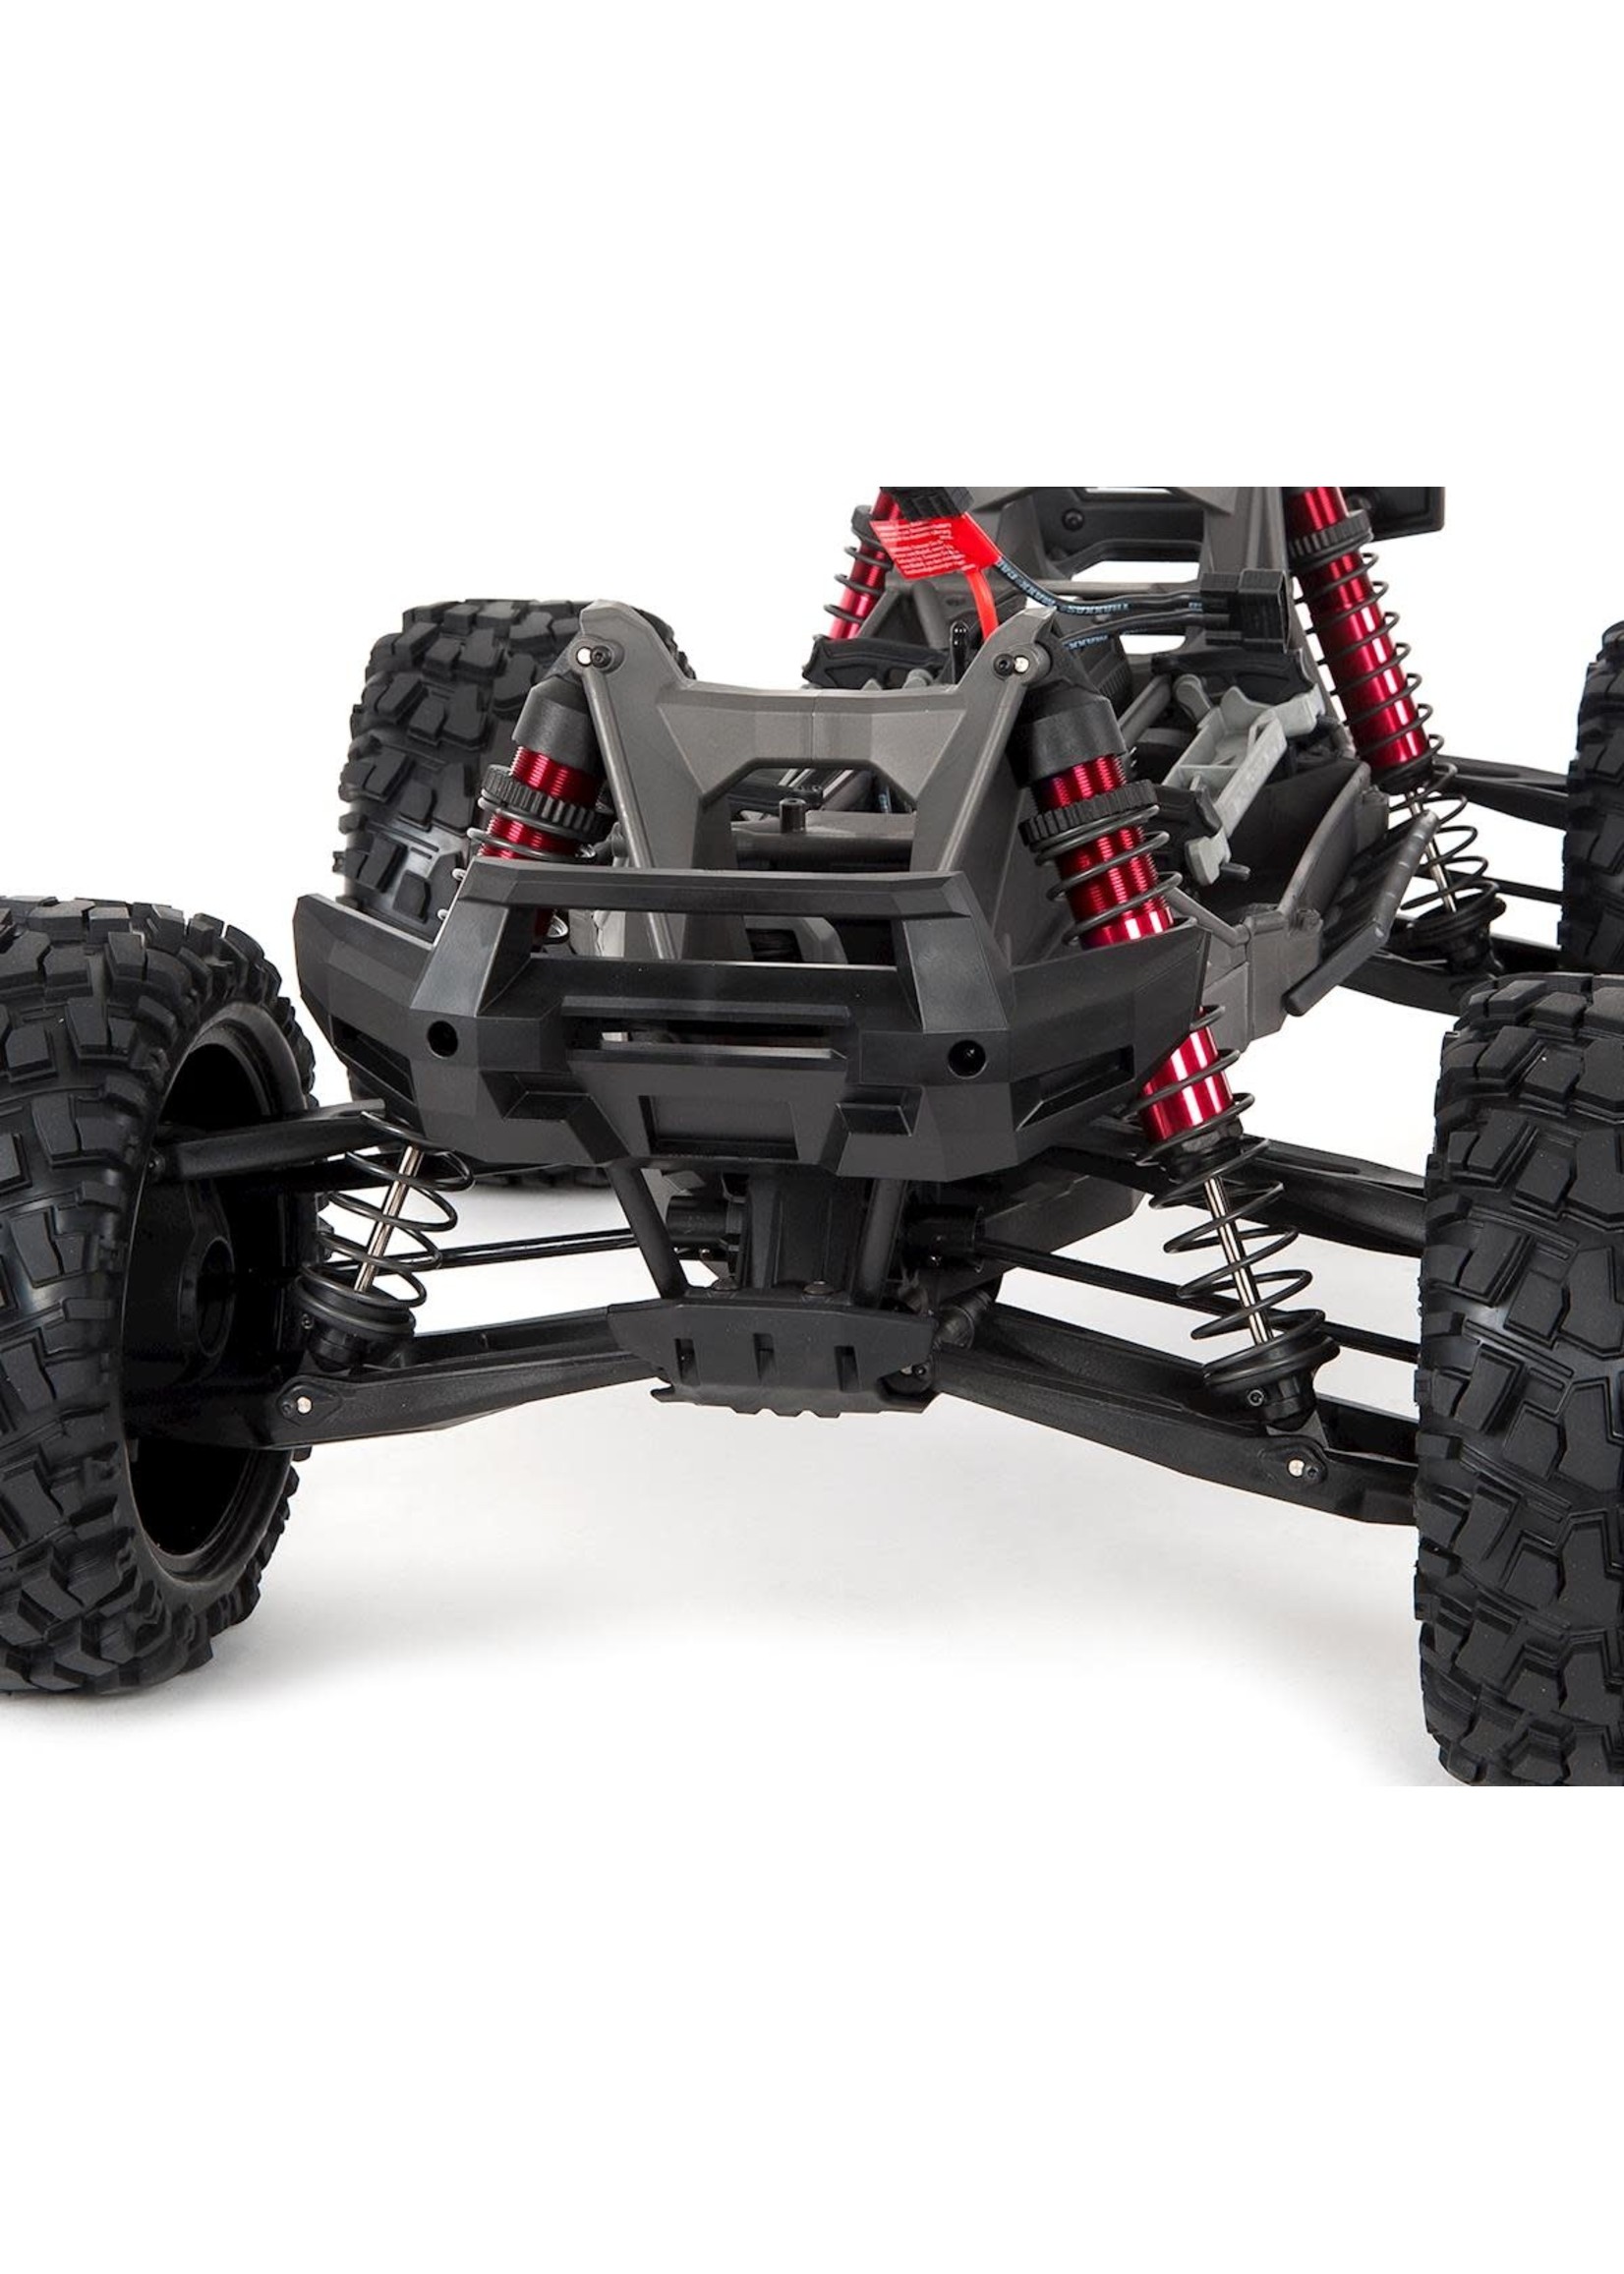 Traxxas 77086-4-REDX X-Maxx : Brushless Electric Monster Truck with TQi Traxxas Link  Enabled 2.4GHz Radio System & Traxxas Stability Management (TSM)